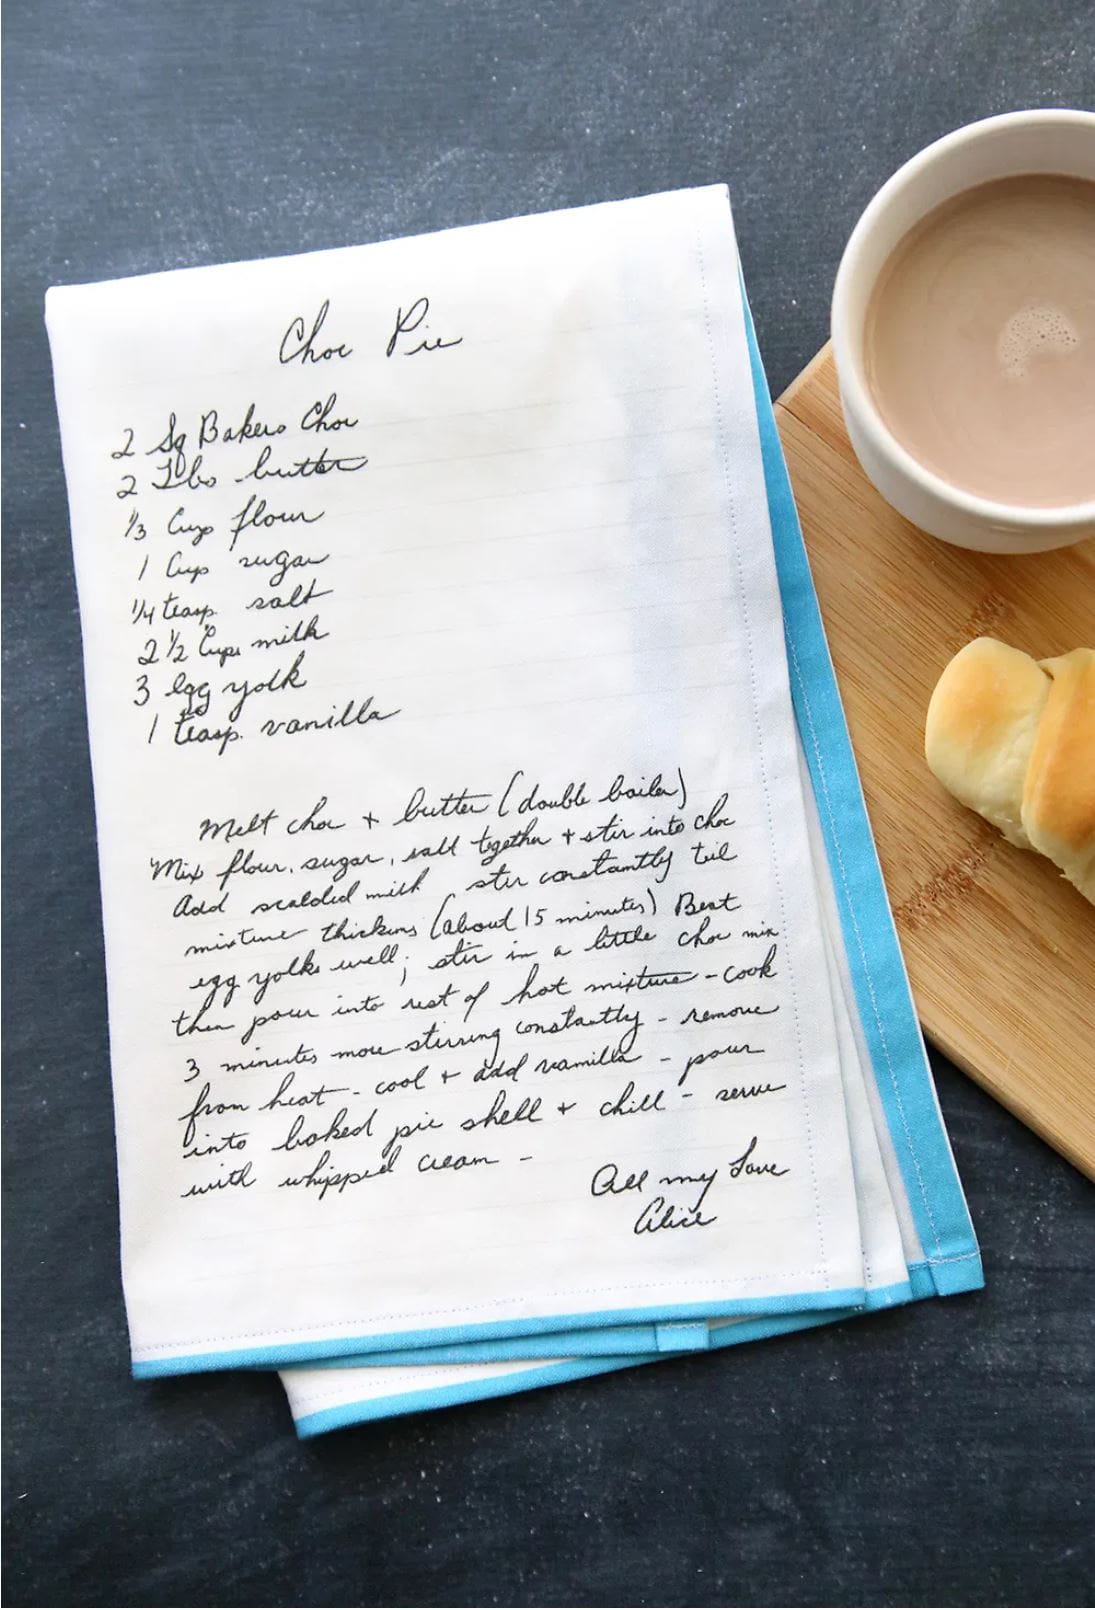 A handwritten recipe towel with an old family recipe printed on basic kitchen towel.